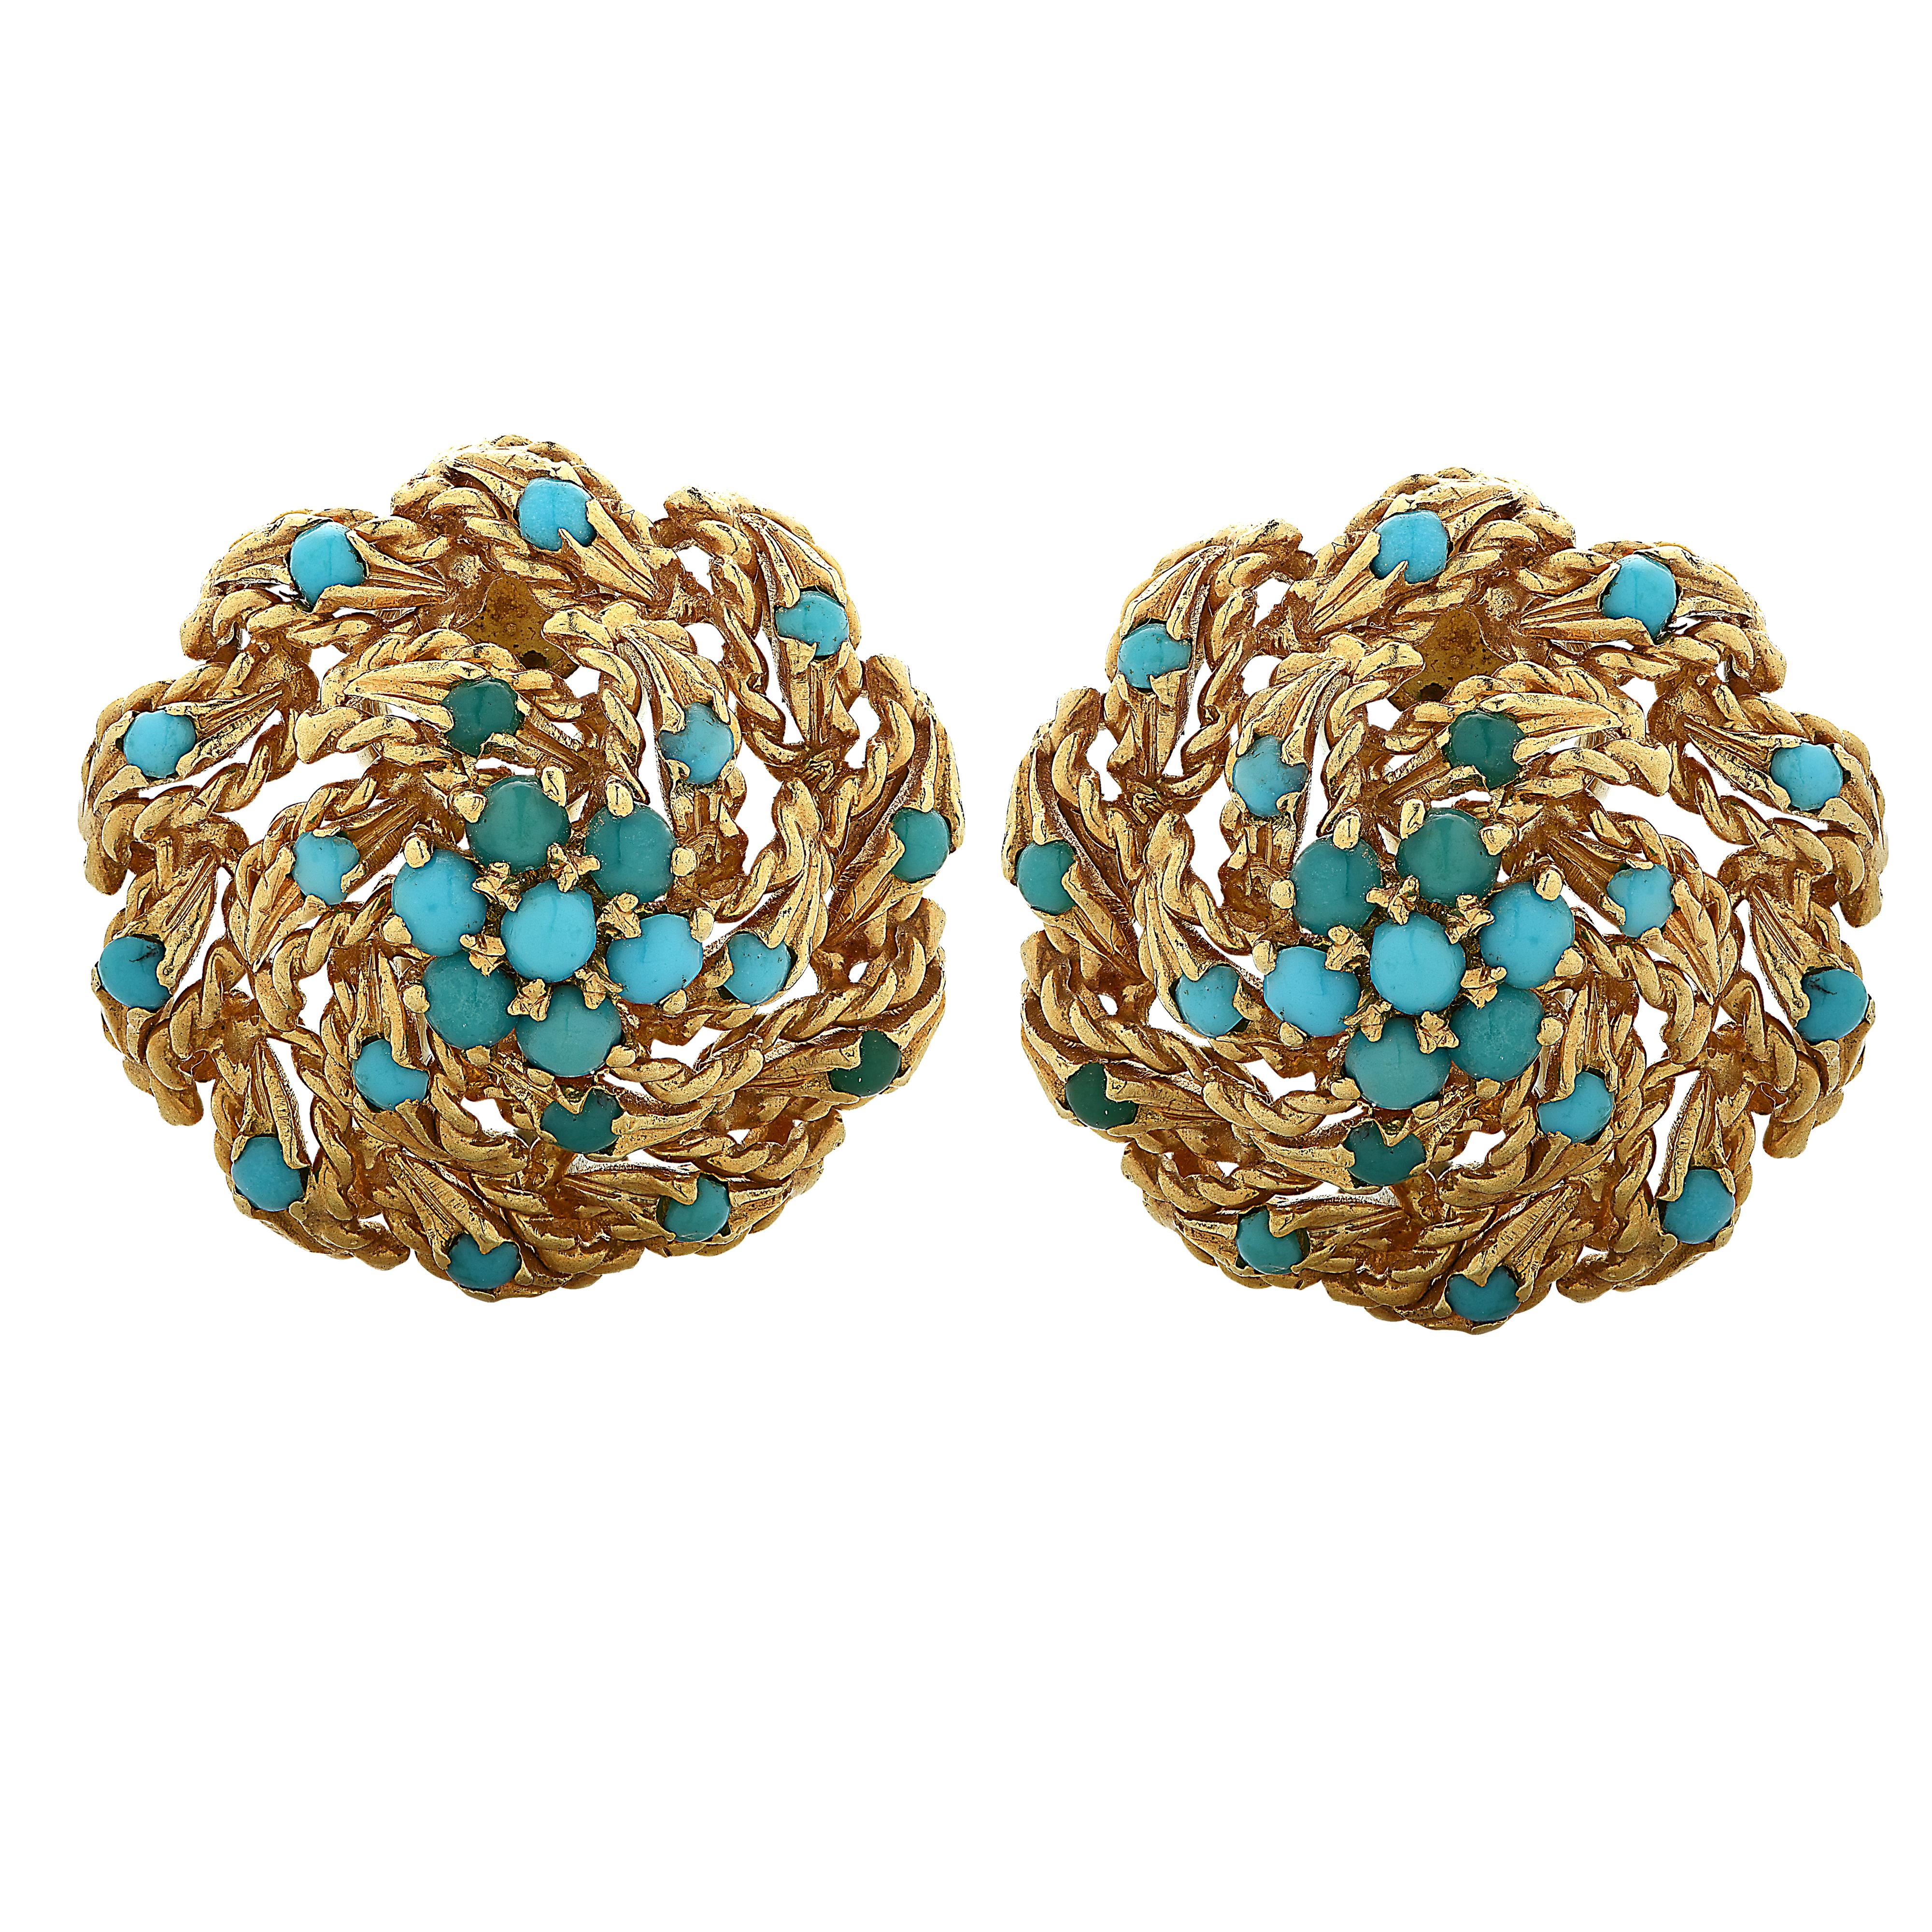 Modern Gold and Turquoise Stud Earrings